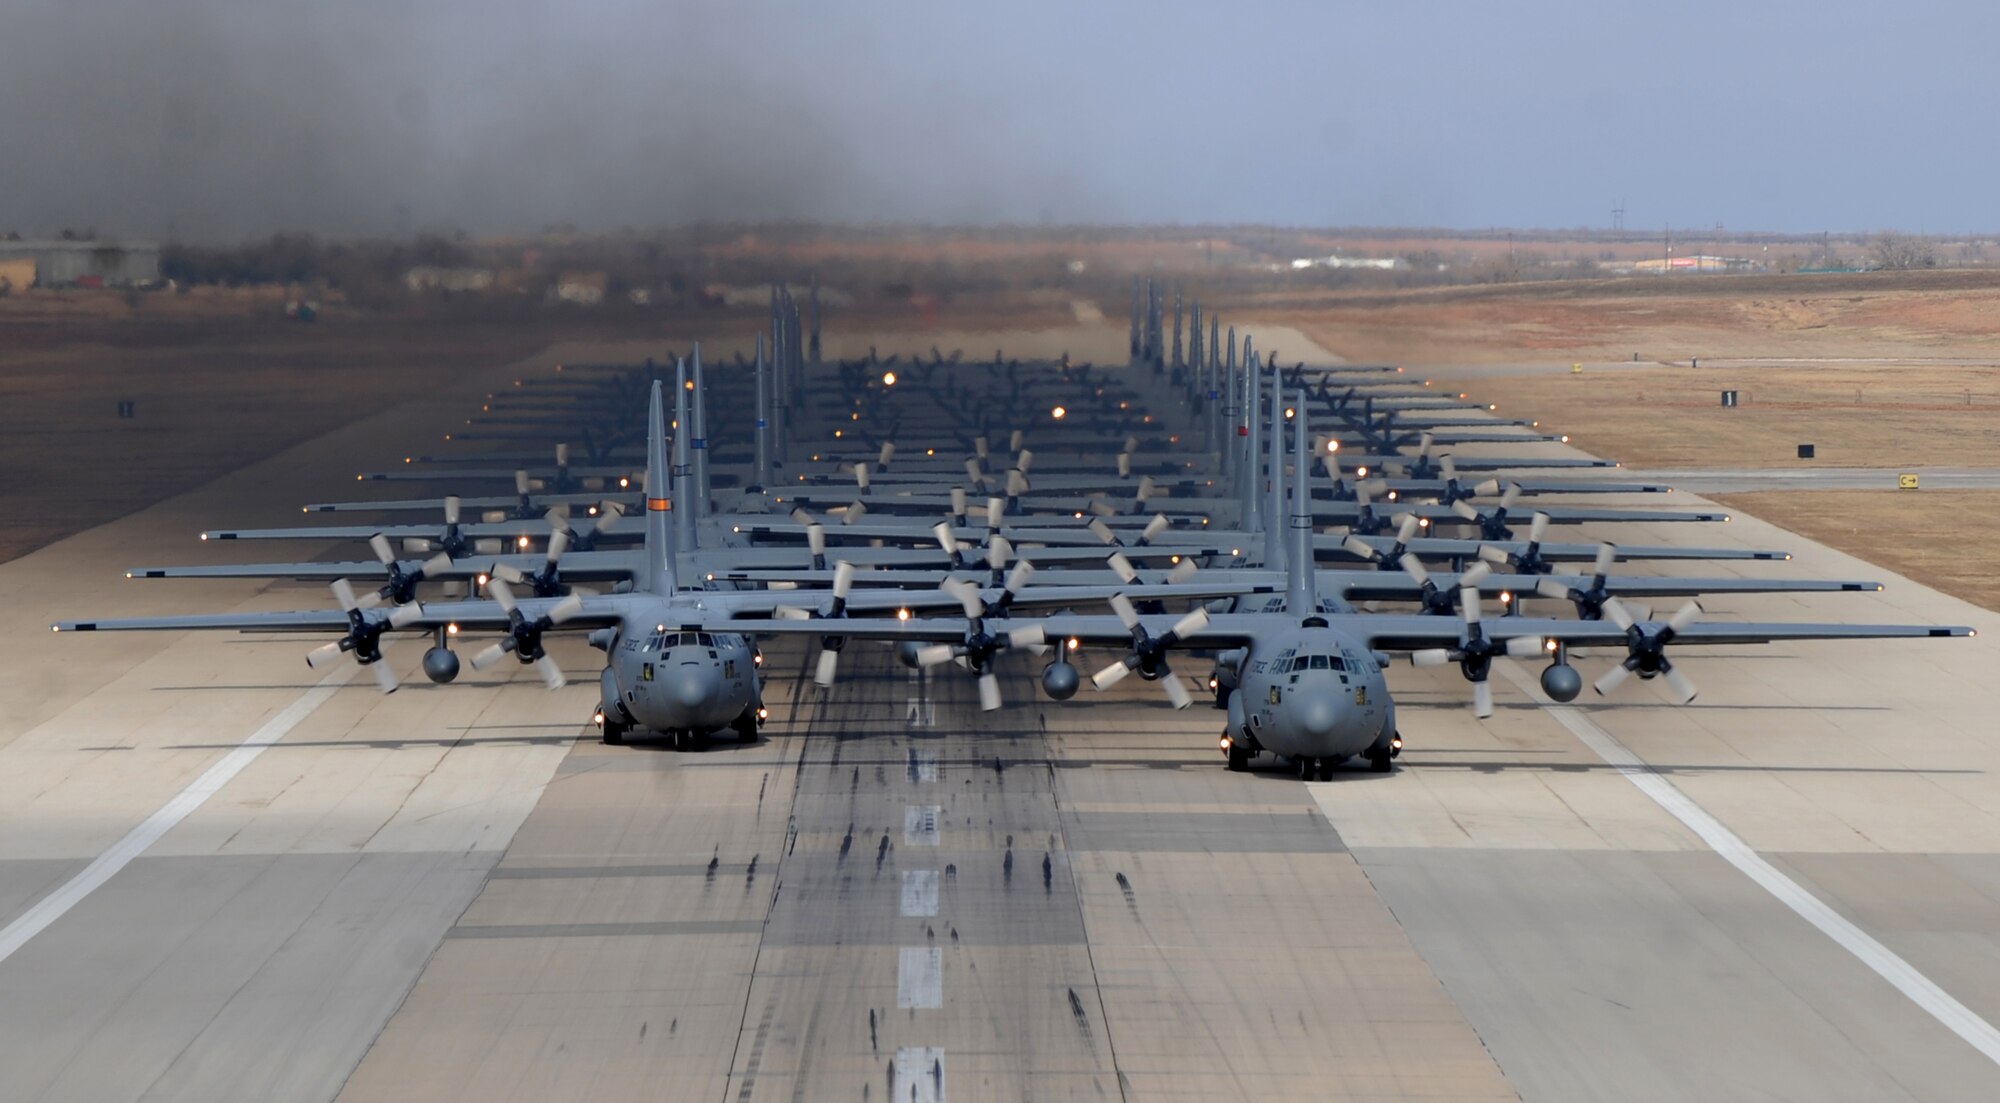 Eleven C-130H Hercules’ from various Air National Guard units and thirteen C-130J Super Hercules’ from the 317th Airlift Group at Dyess Air Force Base, Texas, prepare to take off from Dyess AFB in support of the U.S. Air Force Weapons School's Joint Forcible Entry Exercise 14B Dec. 6, 2014. In addition to the C-130s, the JFEX included approximately 20 C-17 Globemaster IIIs and various other aircraft. (U.S. Air Force photo by Airman 1st Class Alexander Guerrero/Released)